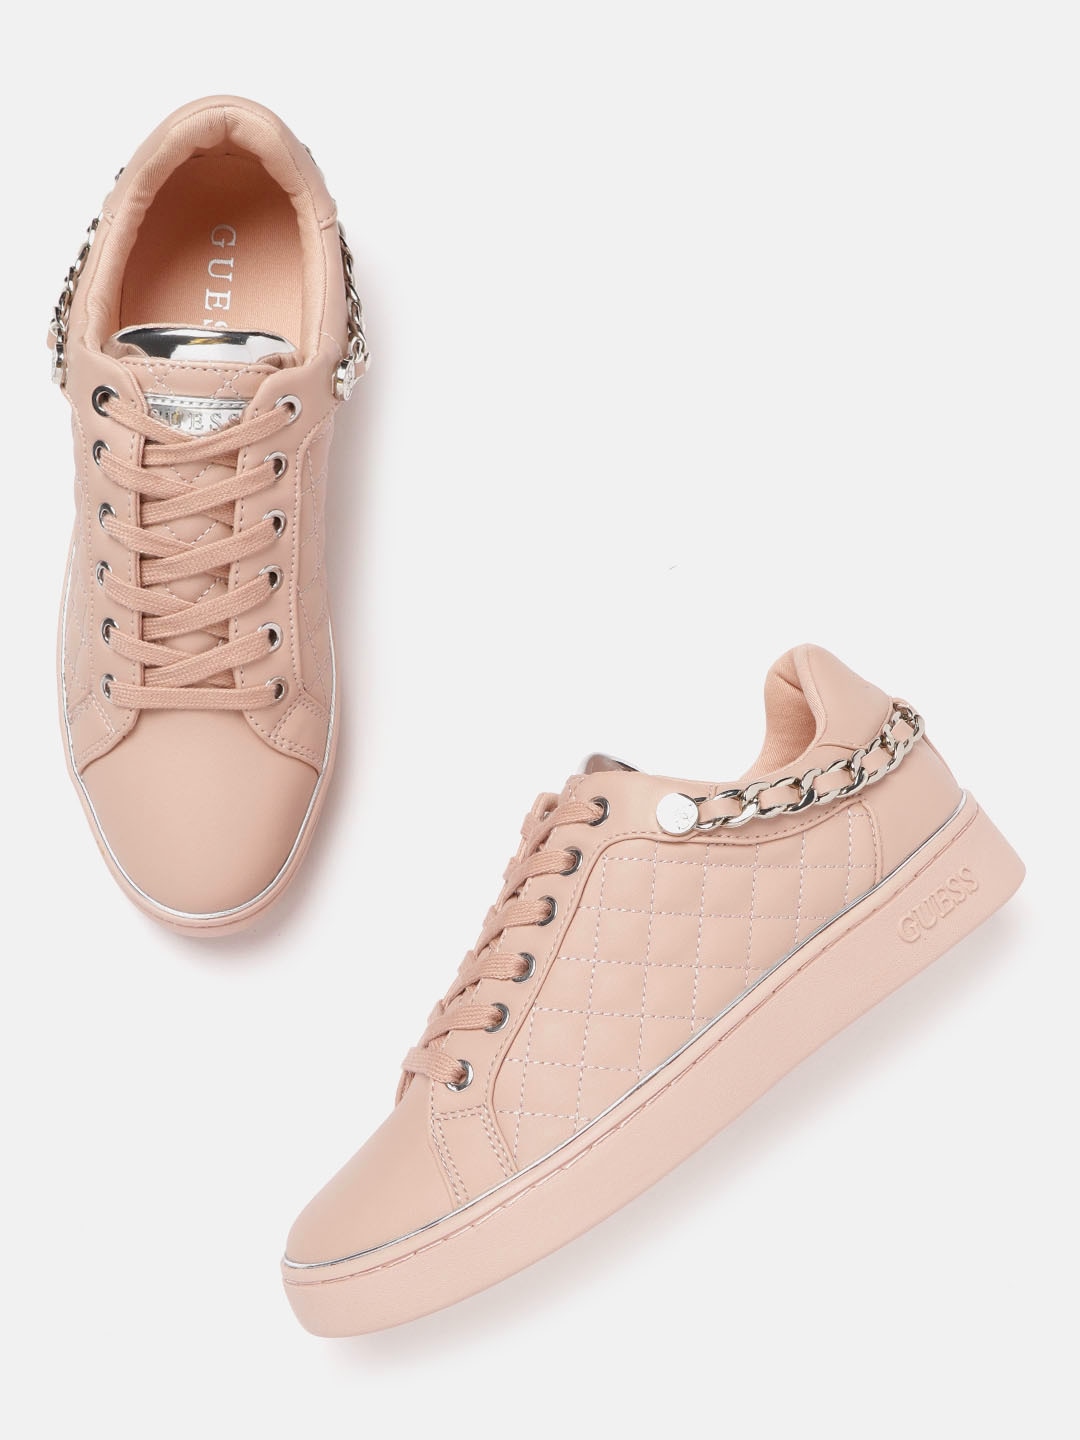 GUESS Women Nude-Coloured Quilted Detail Sneakers Price in India